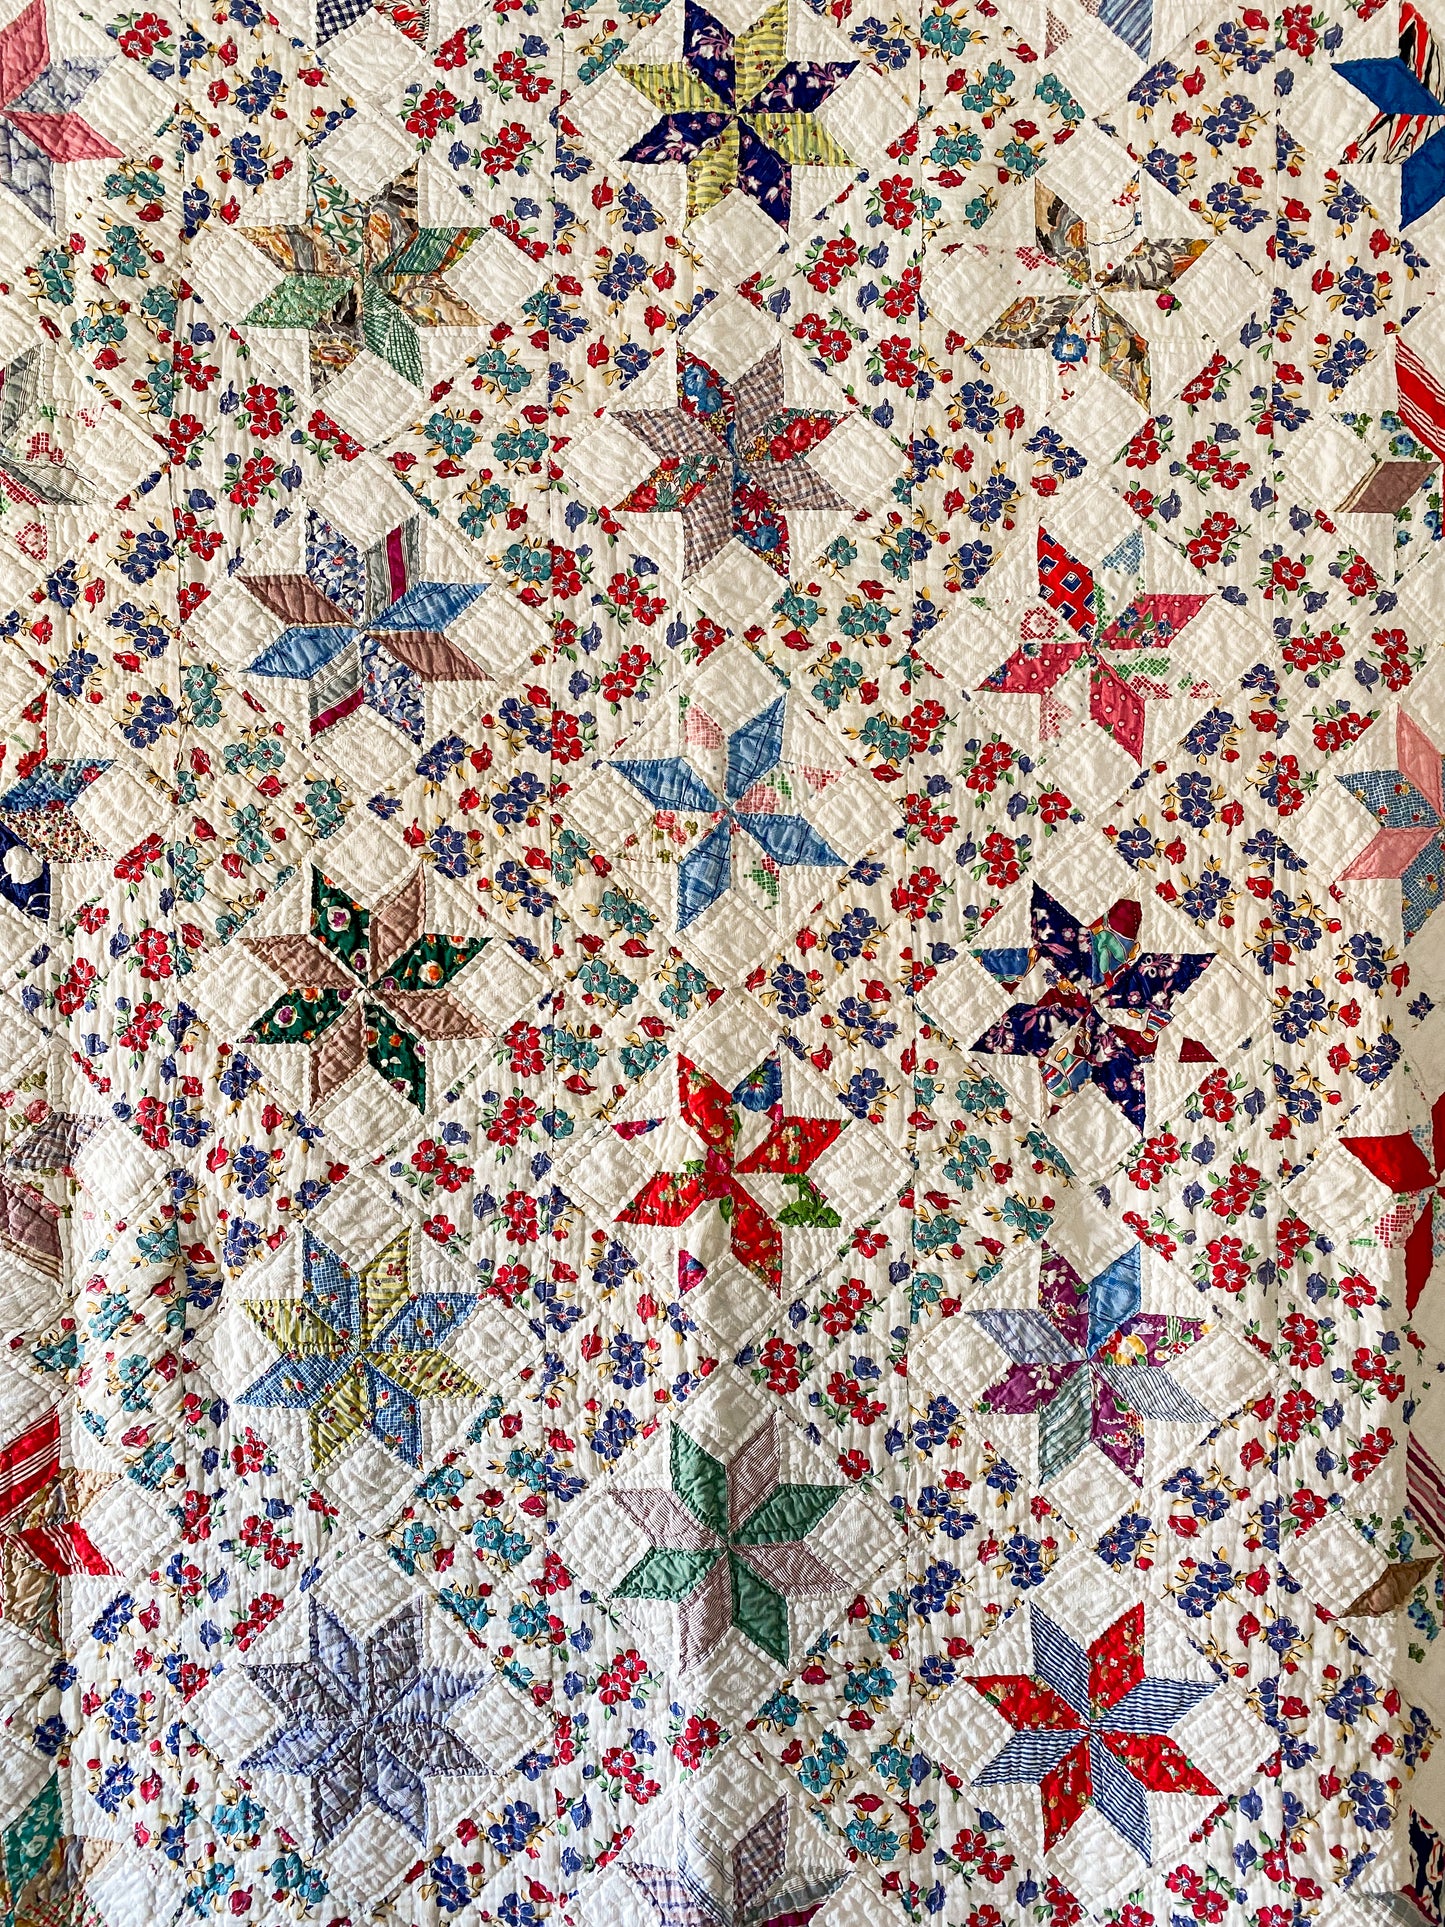 Vintage 8 Pointed Star Quilt with Signature and Printed Sashing, c1940